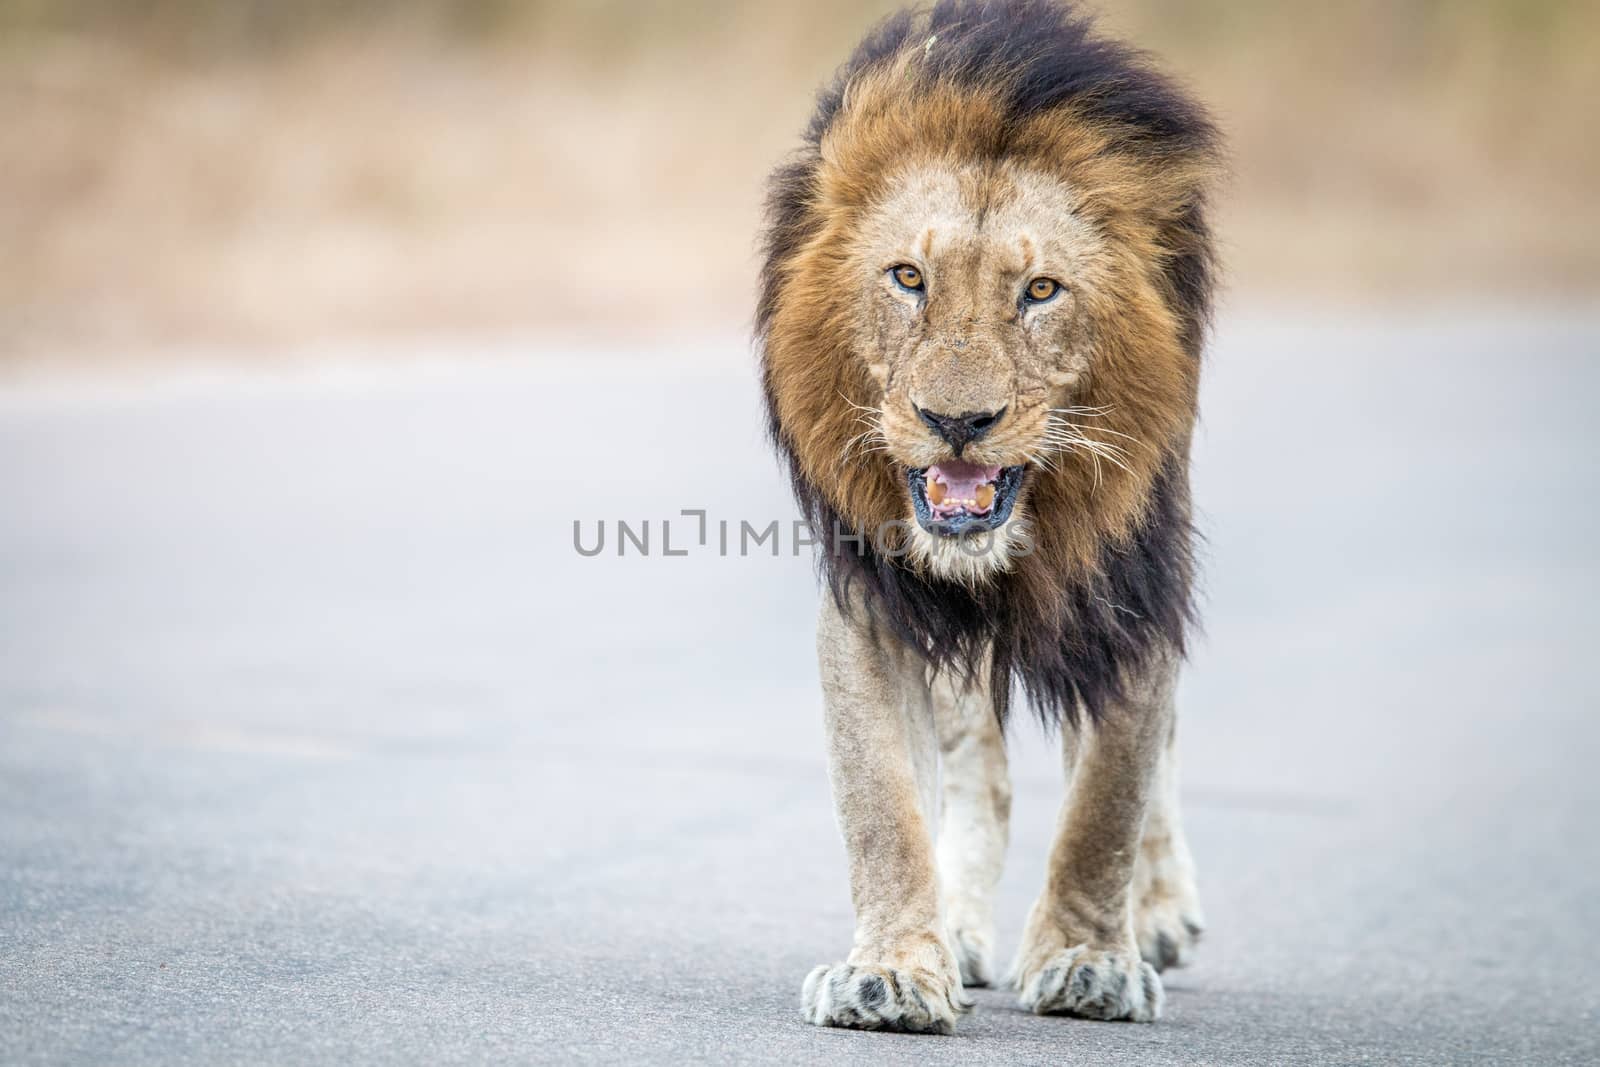 Male Lion walking towards the camera in the Kruger National Park, South Africa.